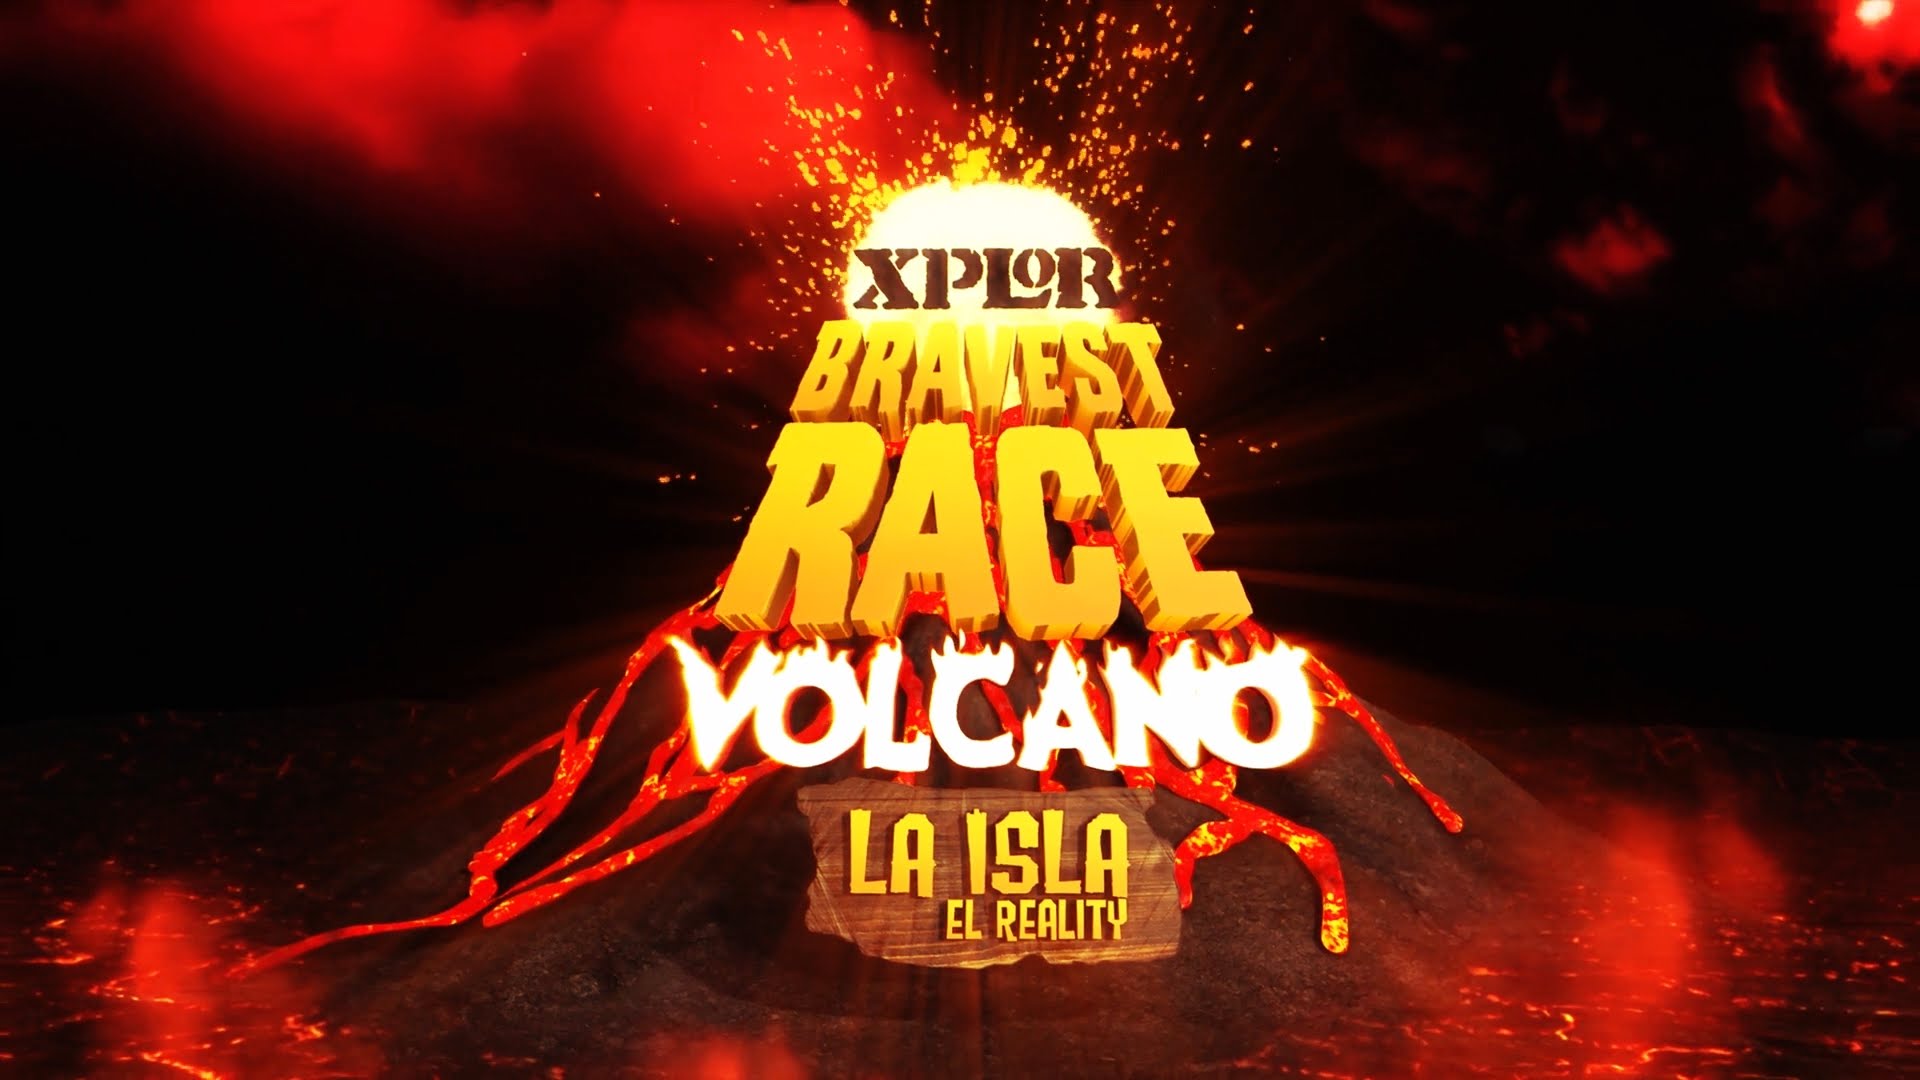 The 2016 Xplor Bravest Race Challenges with 5K of Volcanic Obstacles